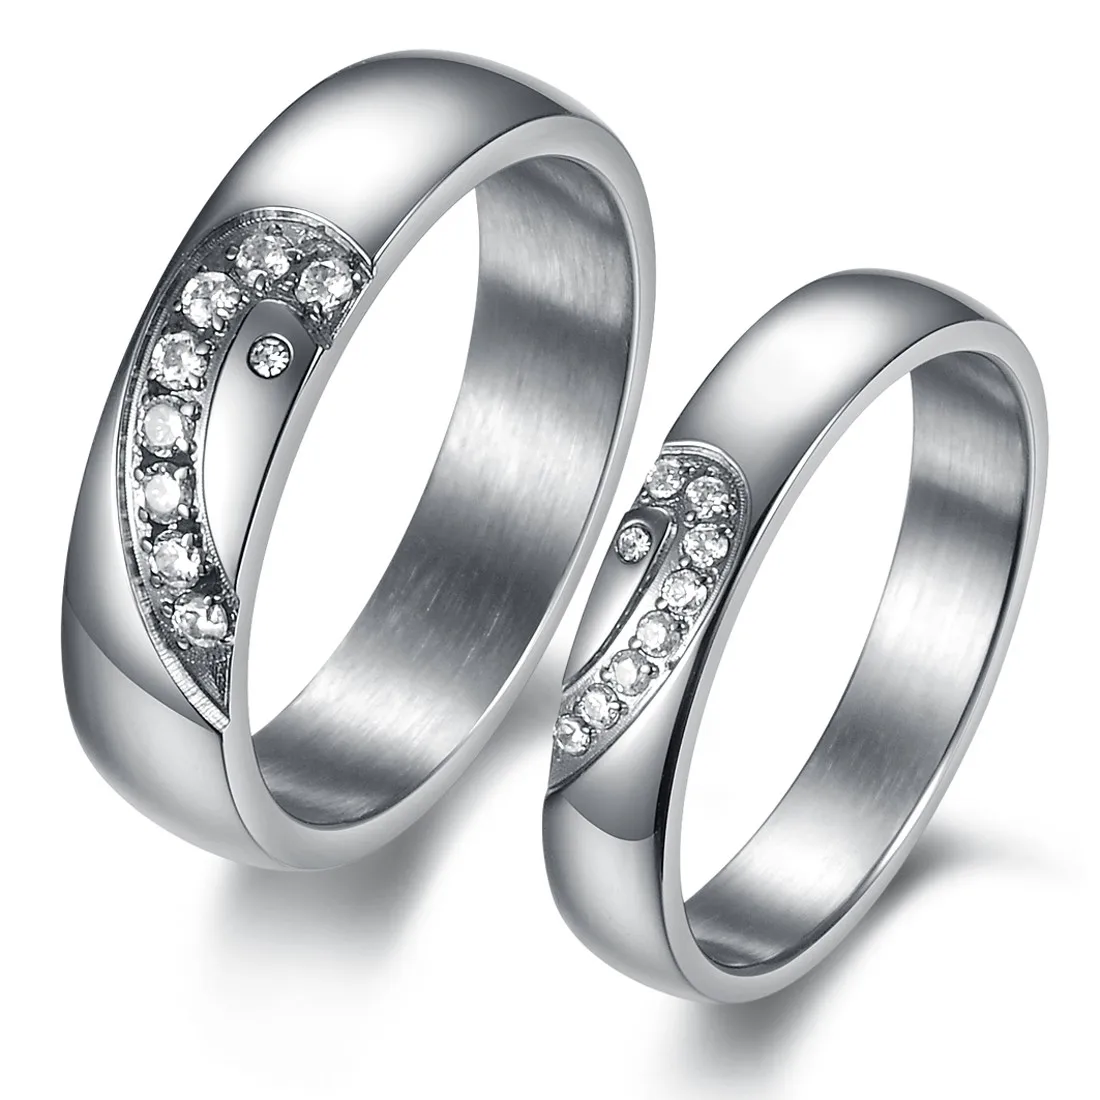 Cheap Silver Rings Wedding Bands Find Silver Rings Wedding Bands